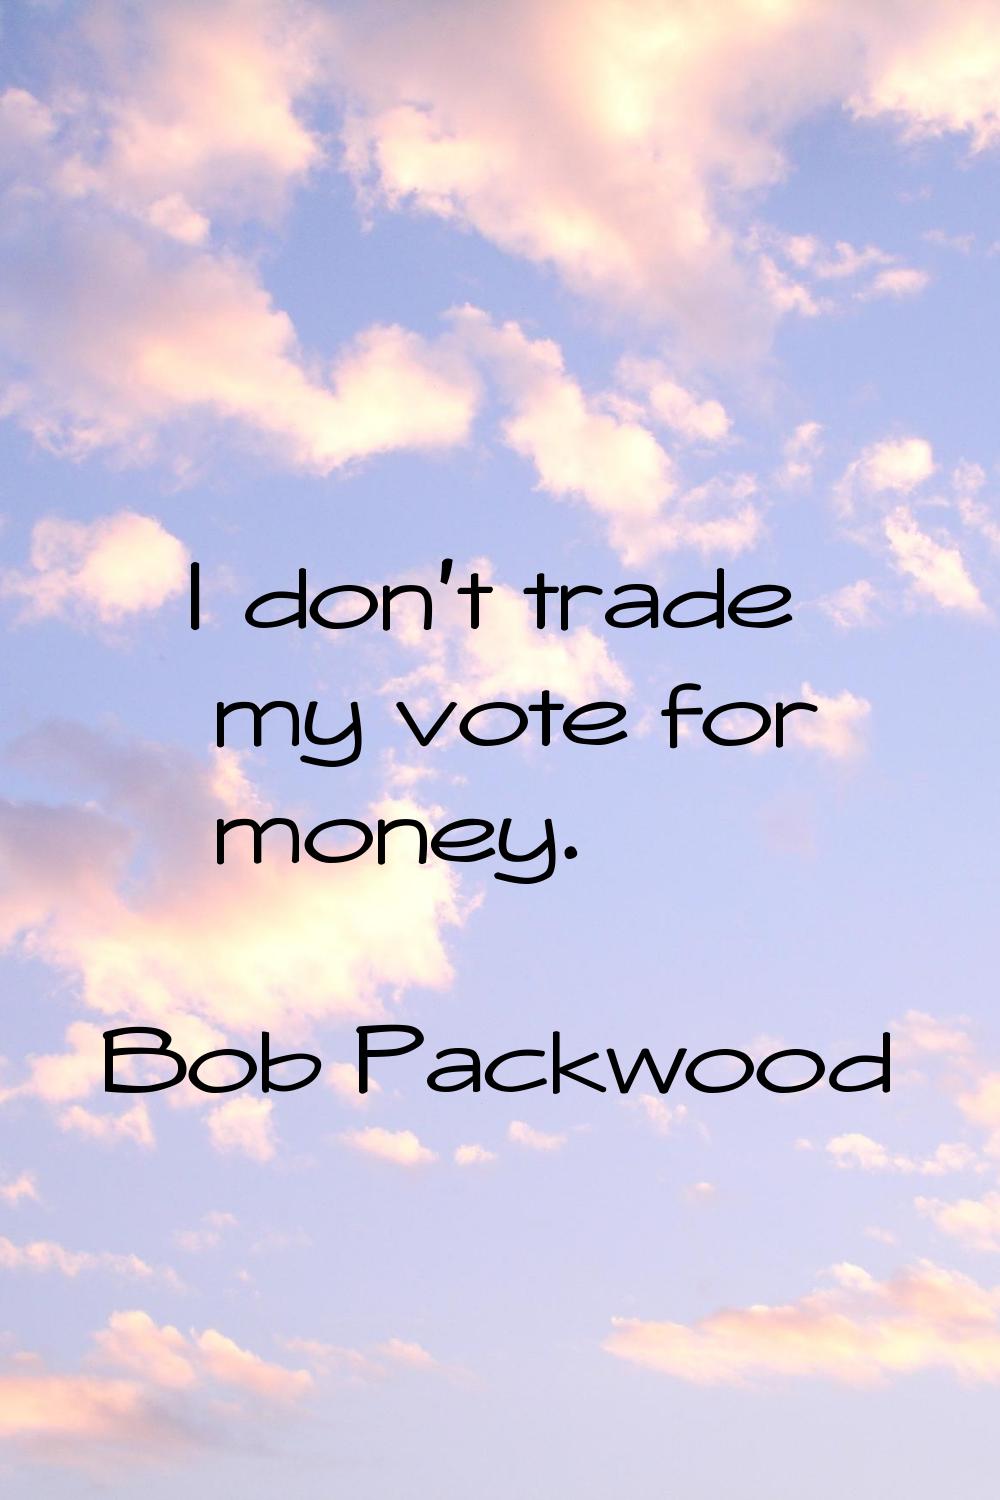 I don't trade my vote for money.